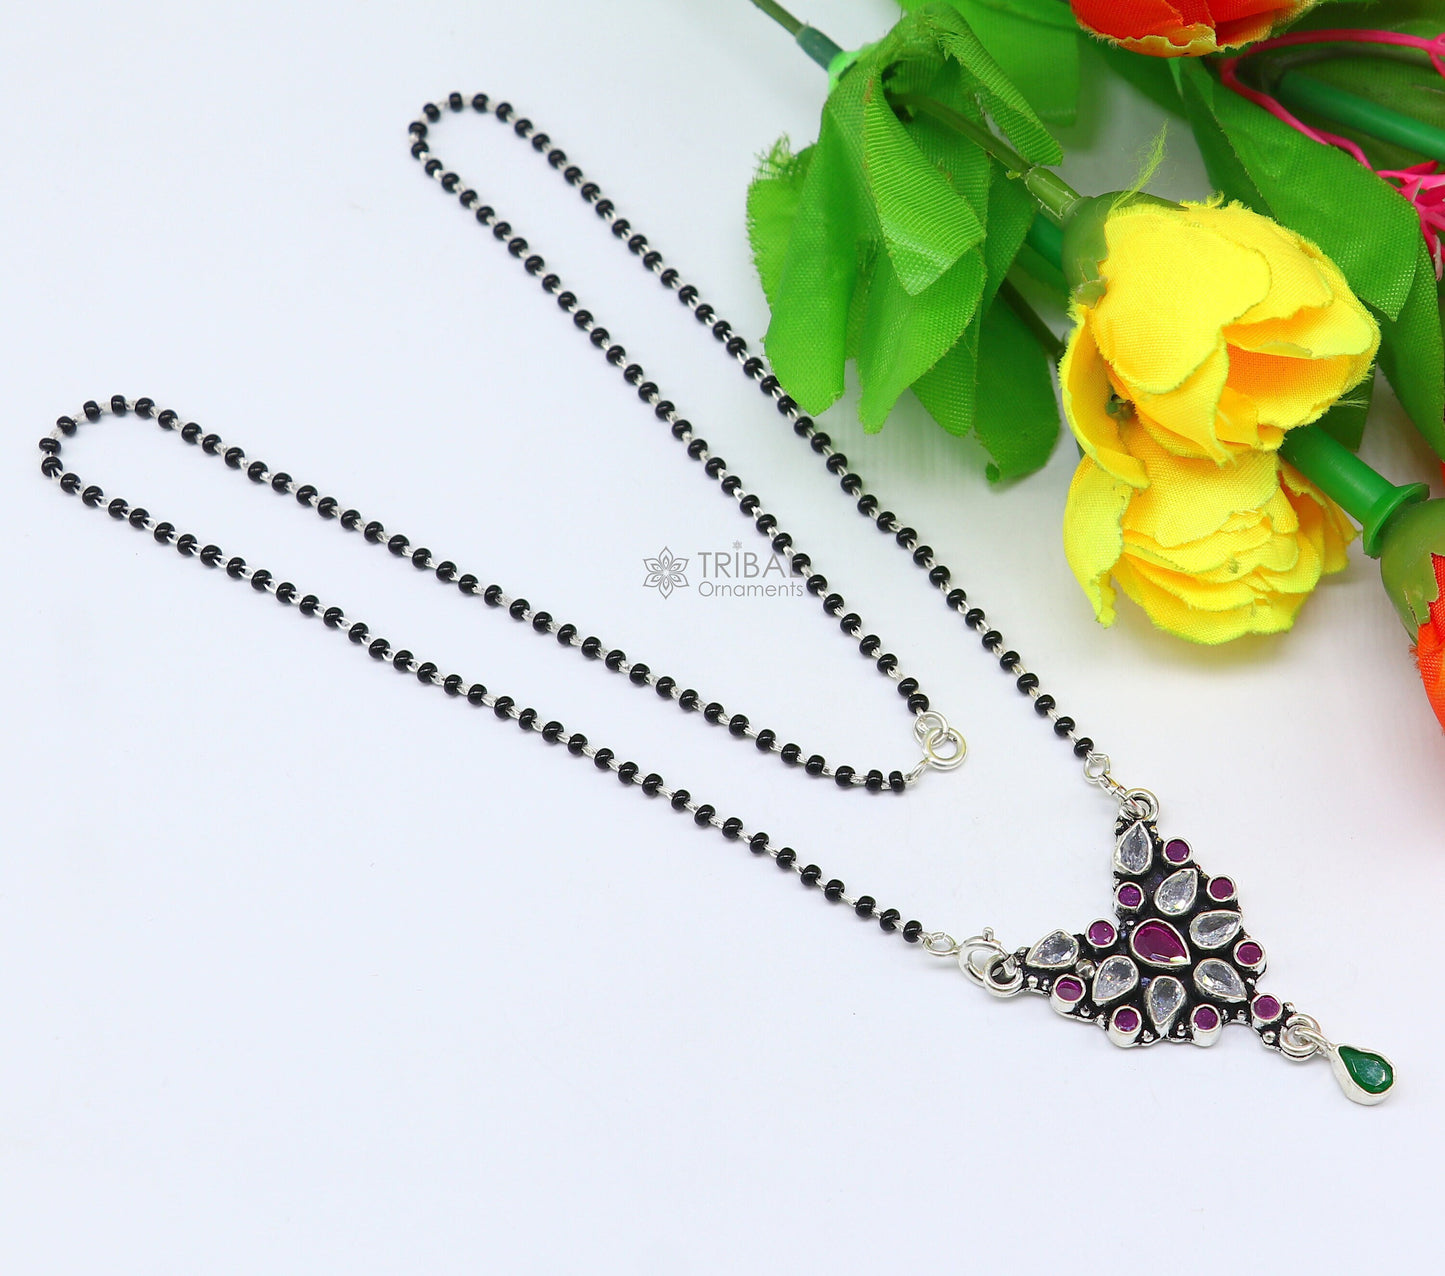 925 sterling silver handmade delicate black beaded chain and fabulous cut stone pendant, amazing brides mangalsutra necklace from india ms43 - TRIBAL ORNAMENTS